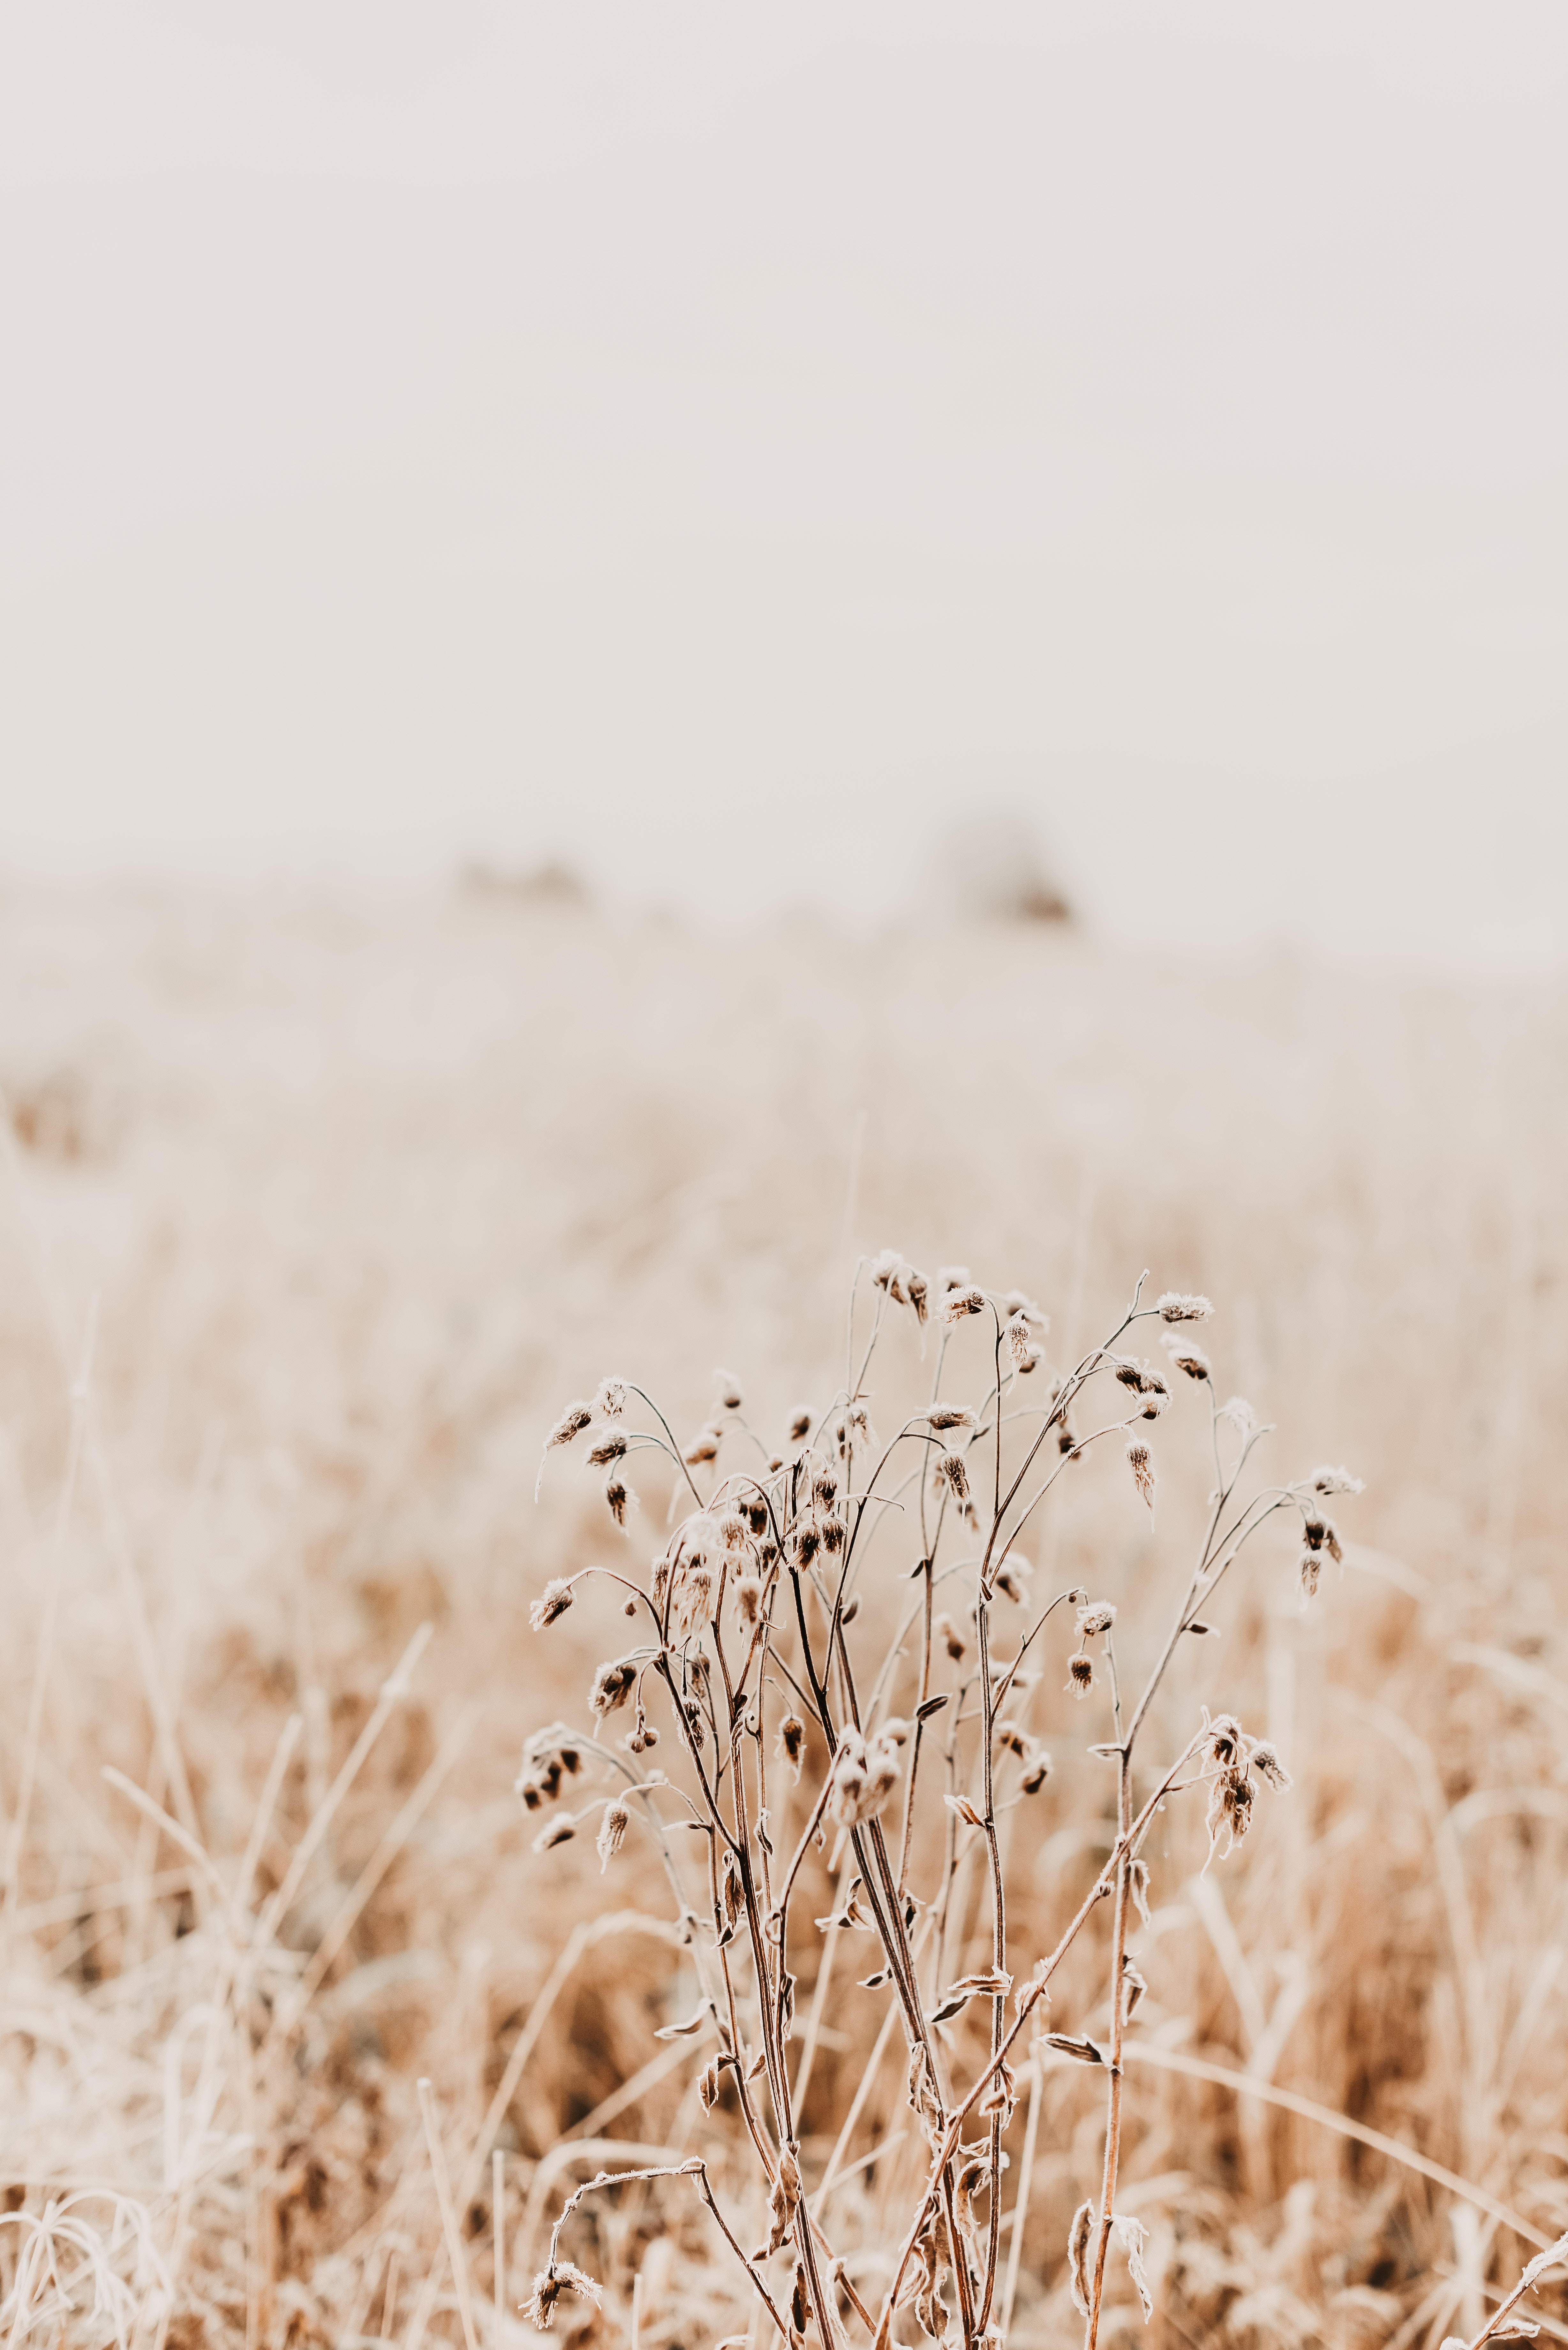 grass, dry, nature, plant